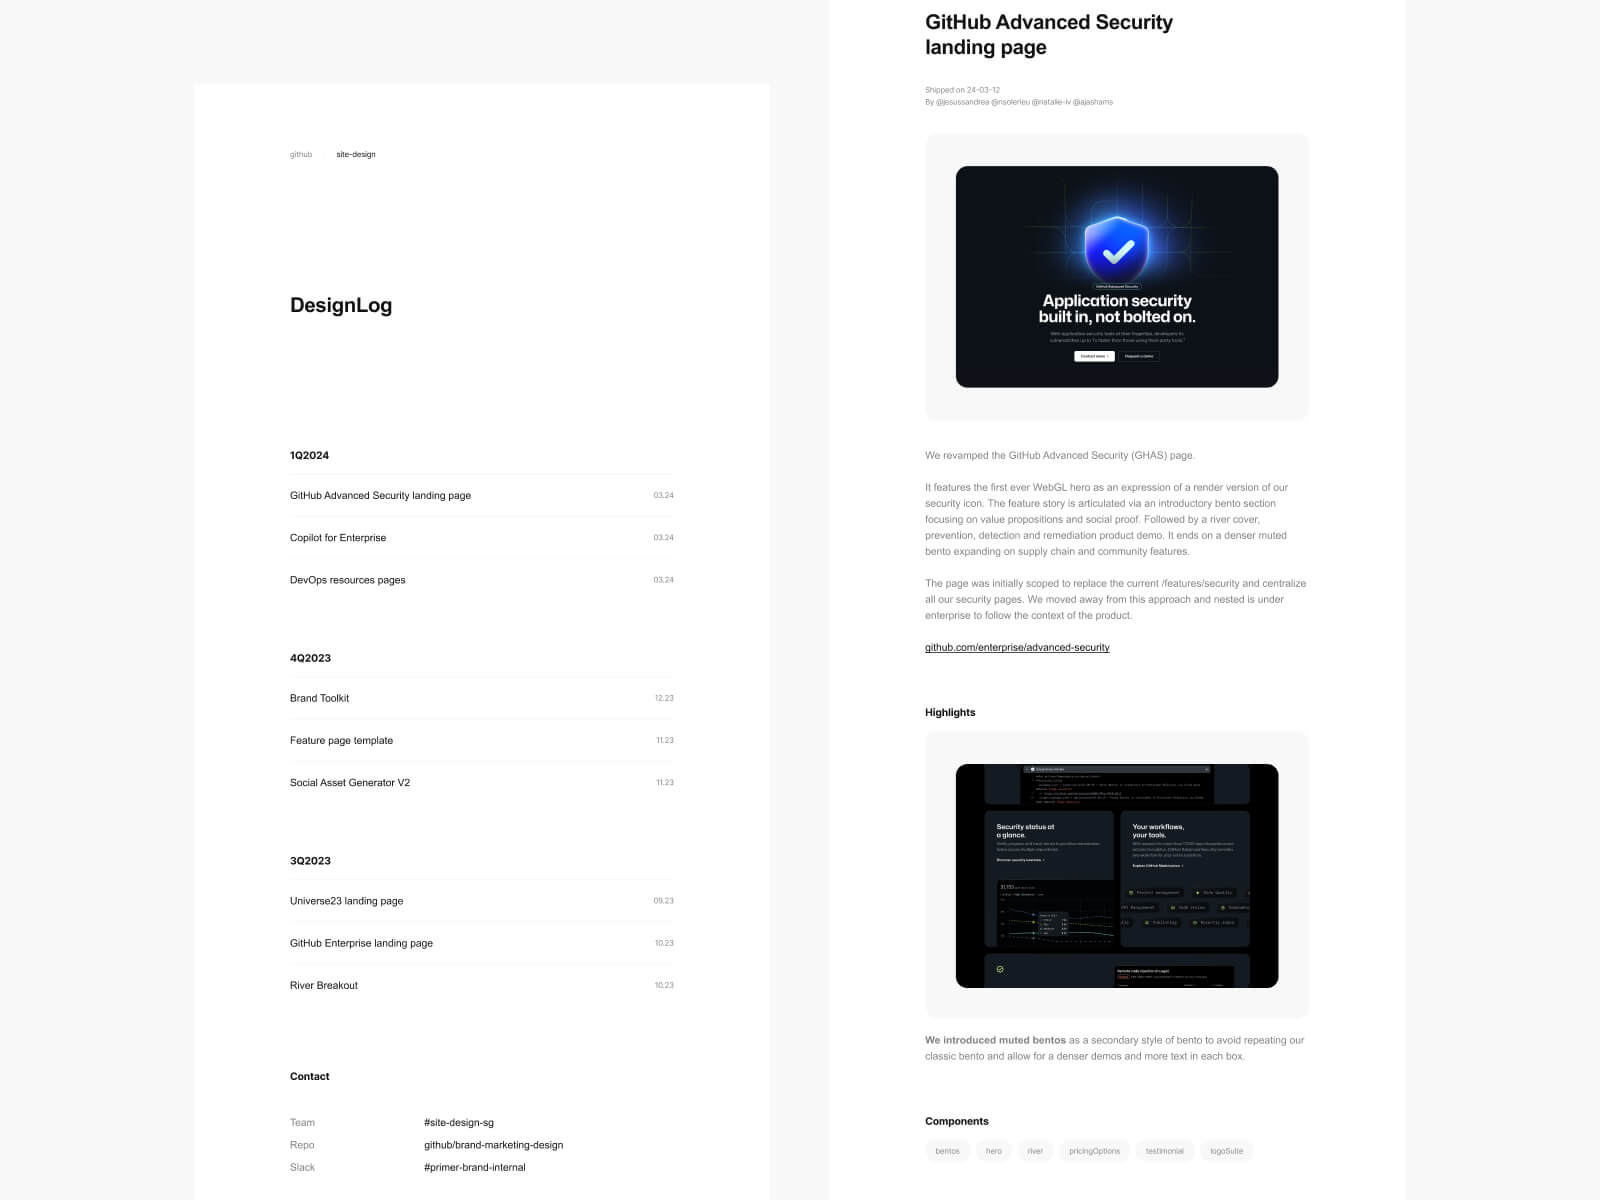 A simple design log feed and detail page